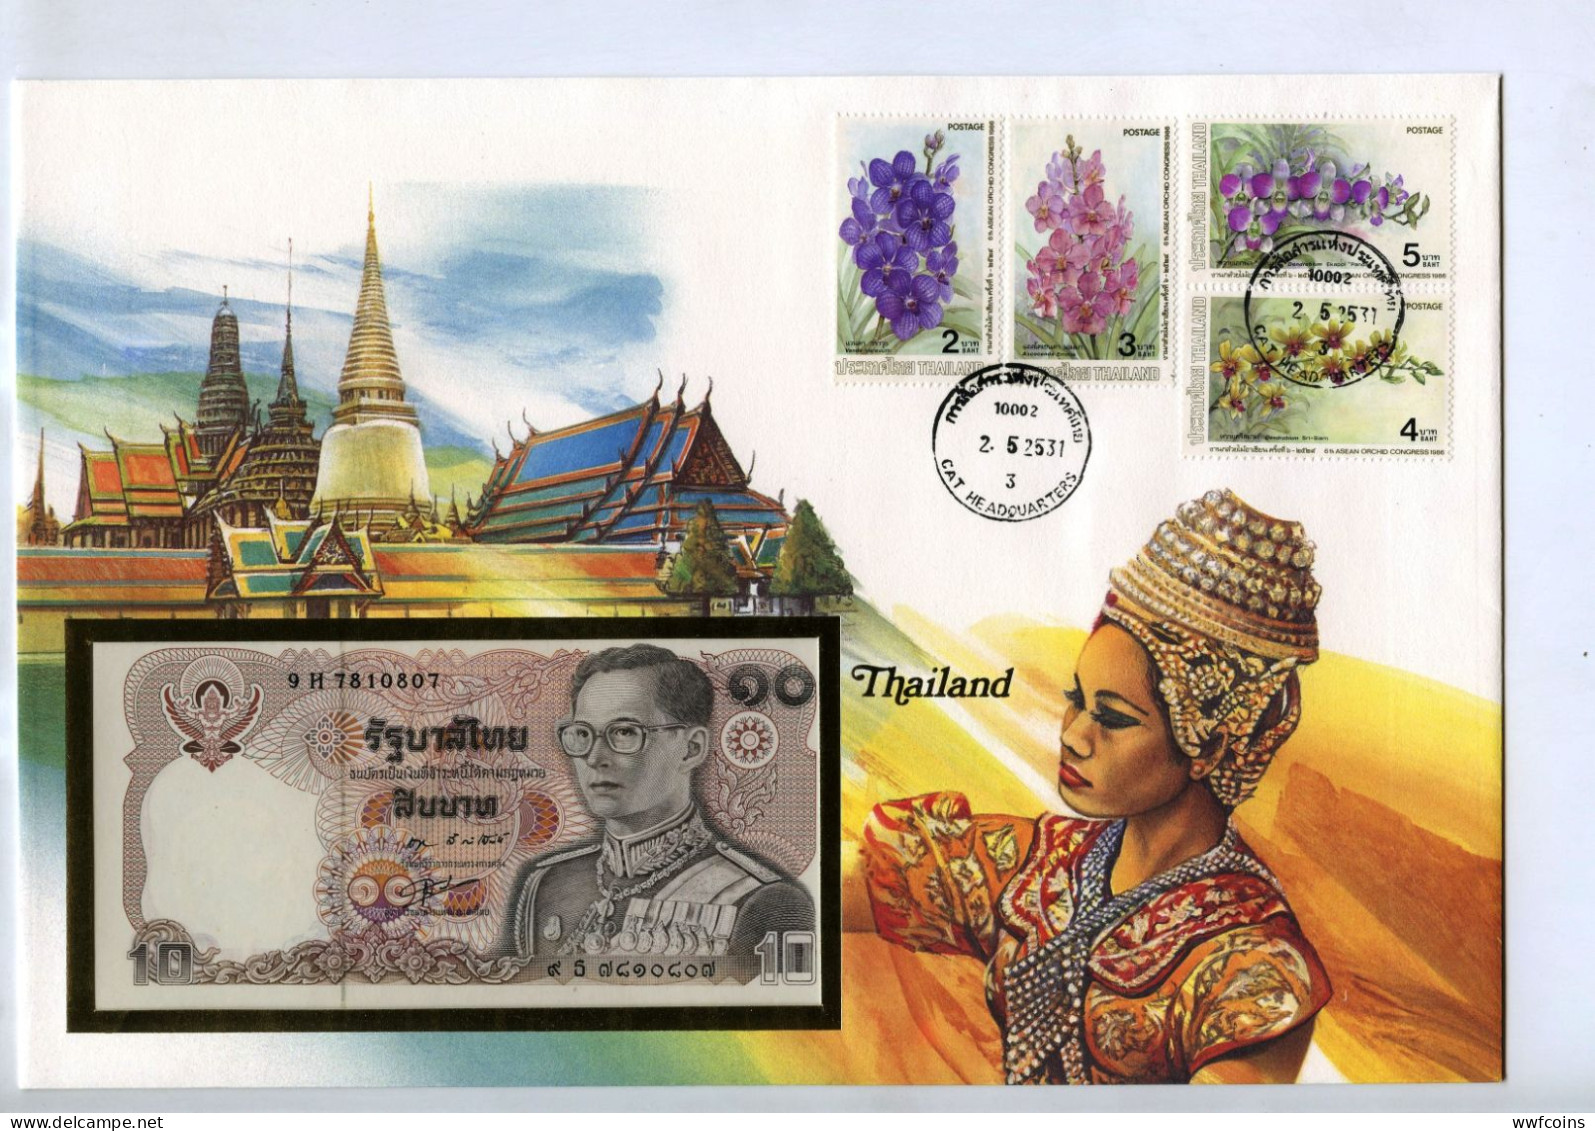 GIANT POSTCARD COMMEMORATIVE TAILANDIA THAILAND ORCHIDEA FLOWER FIRST DAY ISSUE FDS UNC (1) - Thailand